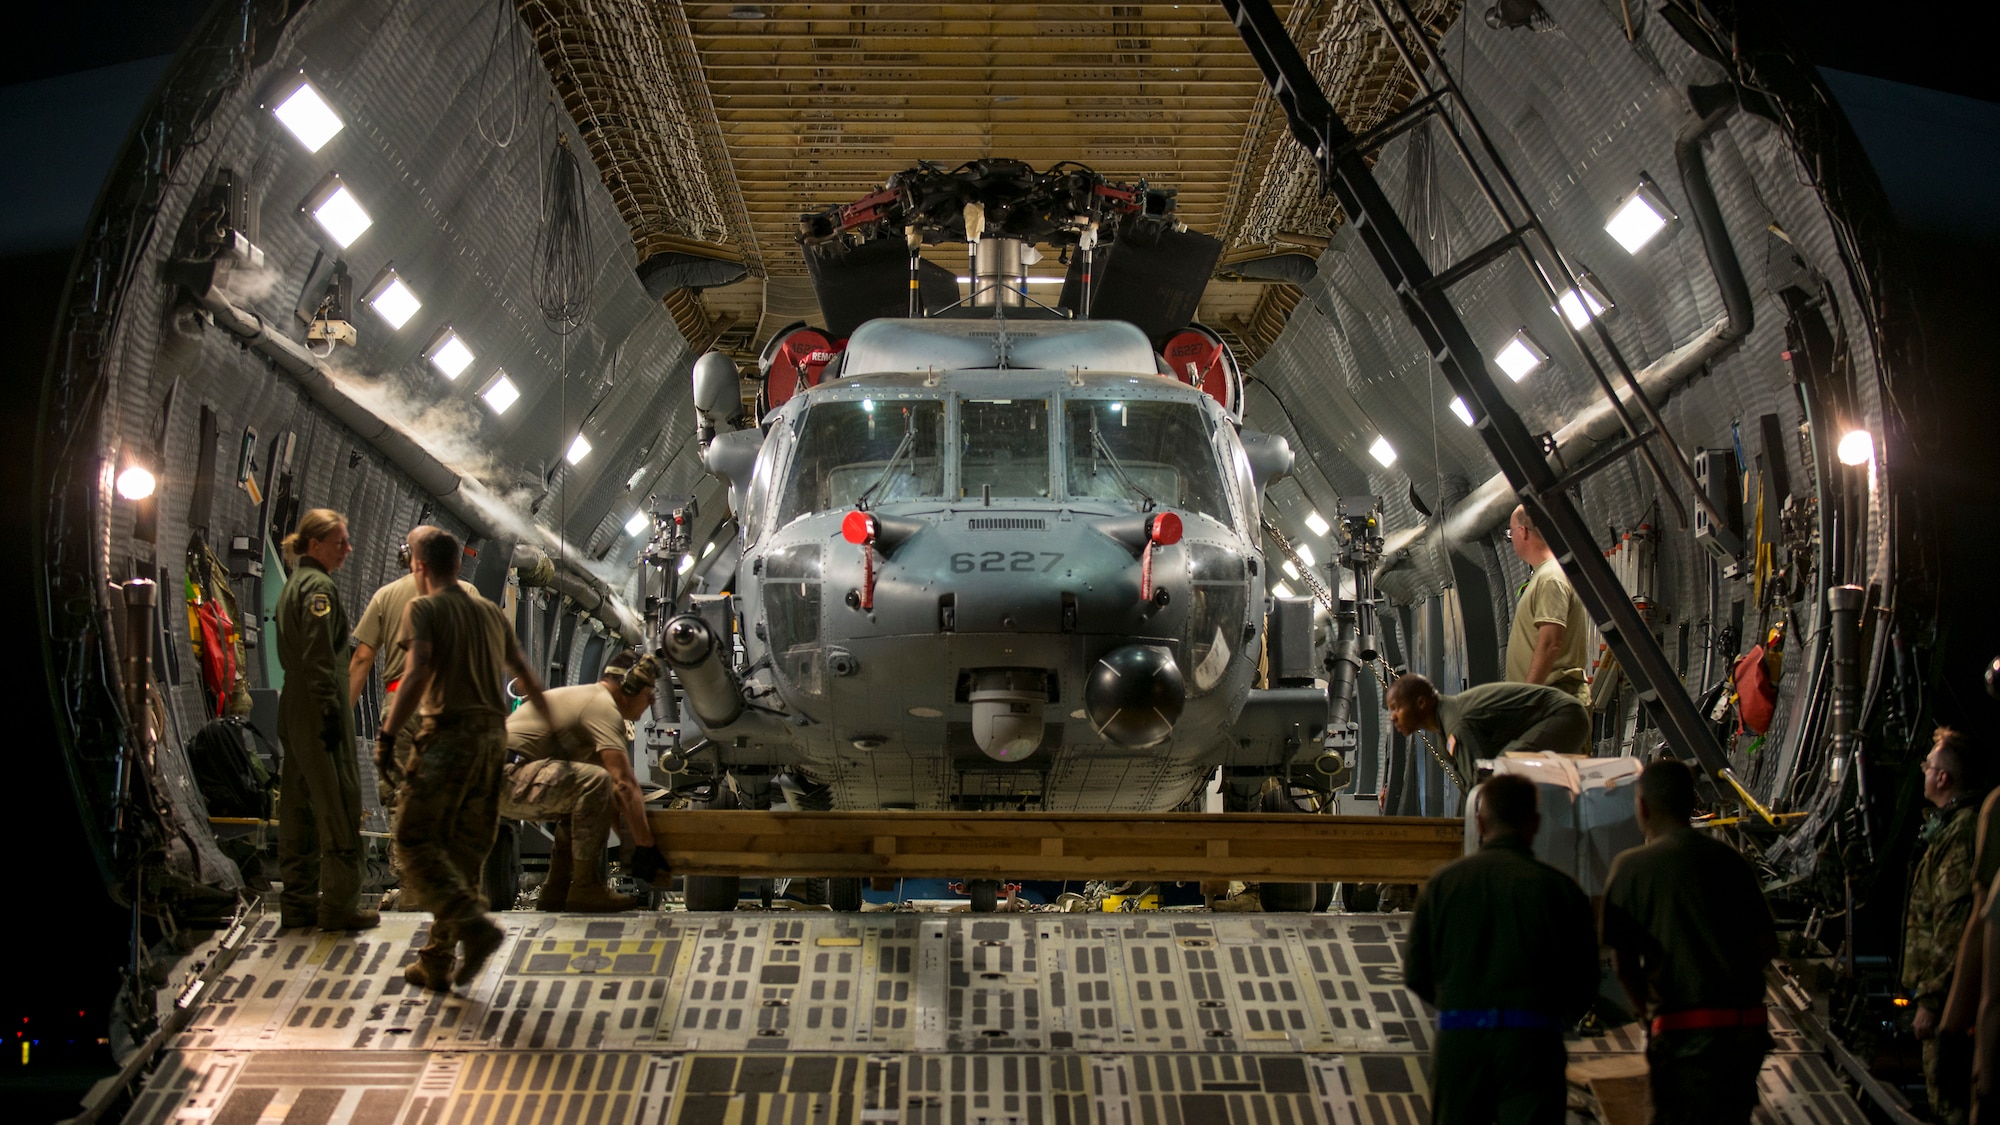 Aircrew prepare to unload an HH-60 Pave Hawk helicopter assigned to the 305th Rescue Squadron, Davis-Monthan Air Force Base, Ariz., from a C-5 Super Galaxy assigned to the 512th Airlift Wing, Dover Air Force Base, Del., at MacDill Air Force Base, Fla., Nov. 6, 2019.